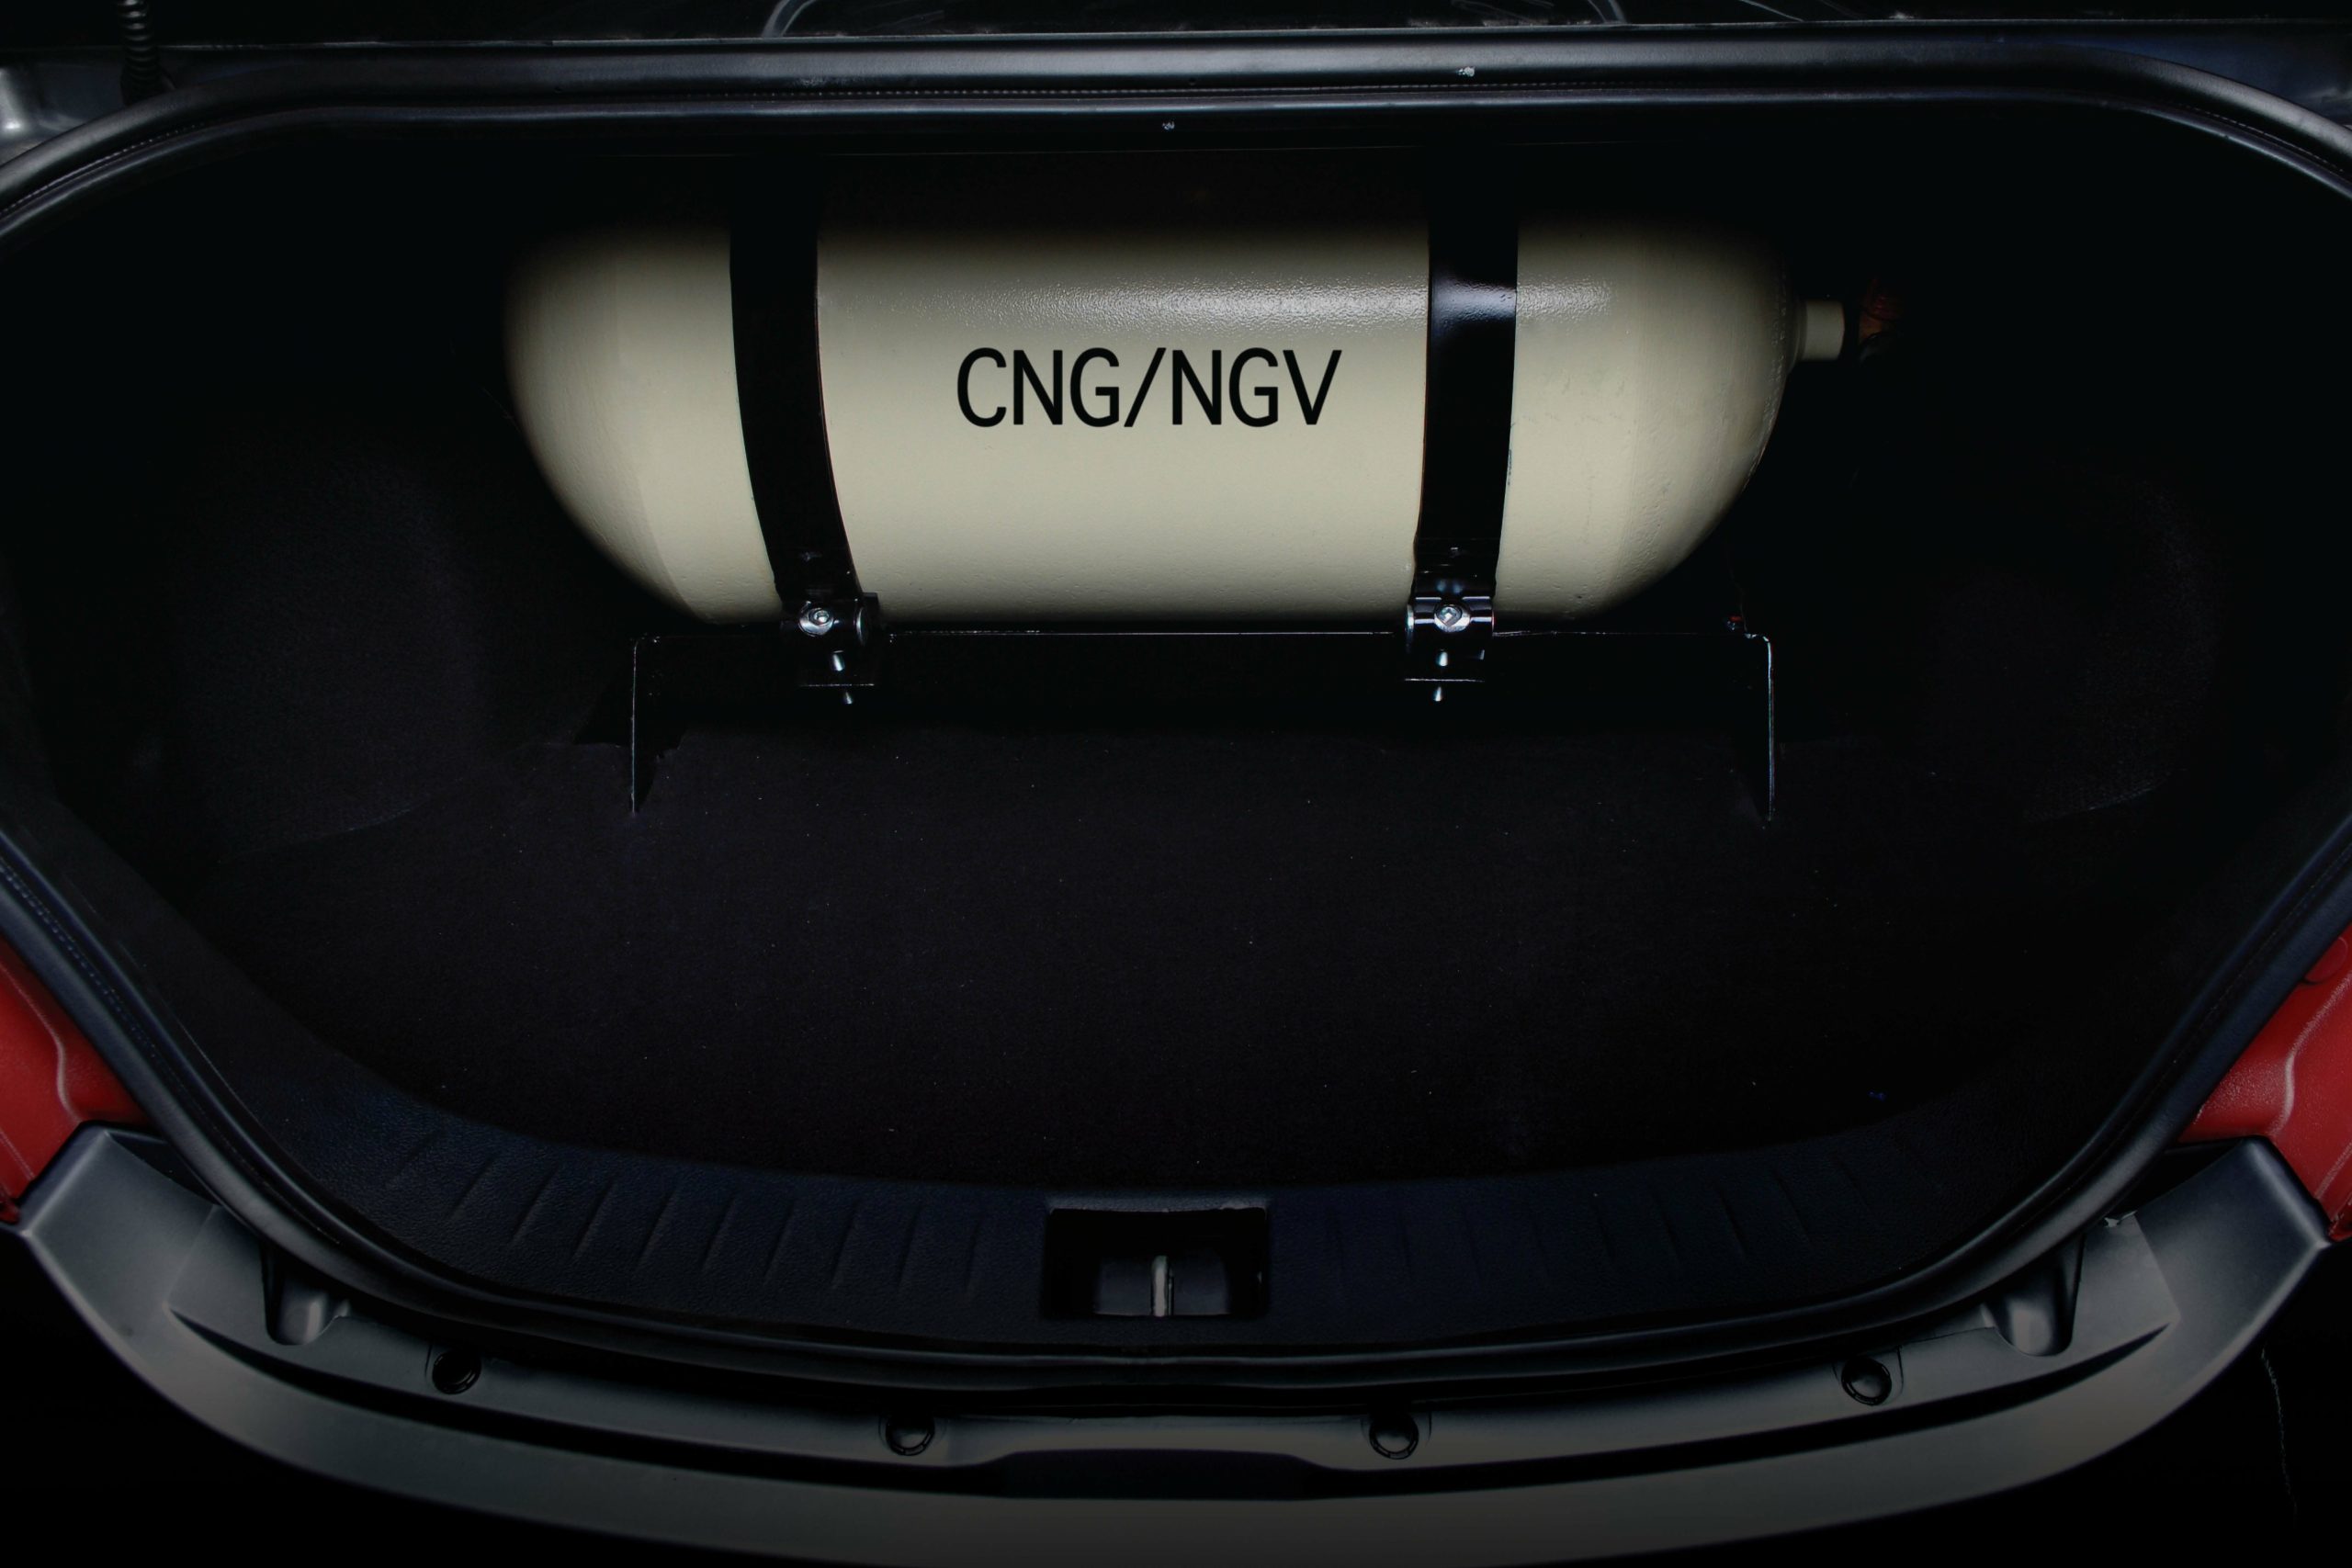 A cng (compressed natural gas) tank installed in the trunk of a vehicle.